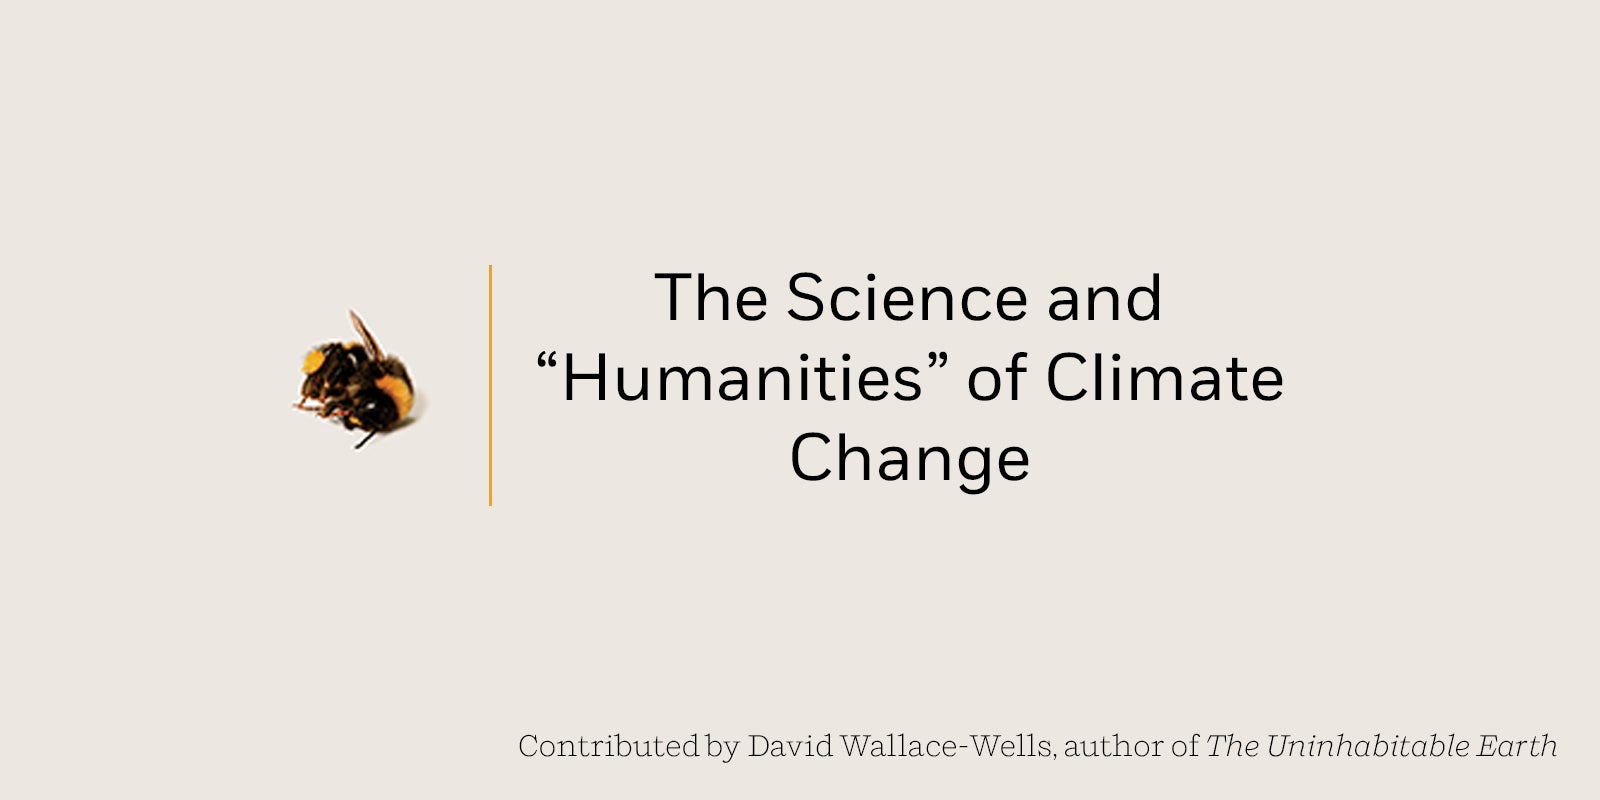 David Wallace-Wells on the Science and “Humanities” of Climate Change